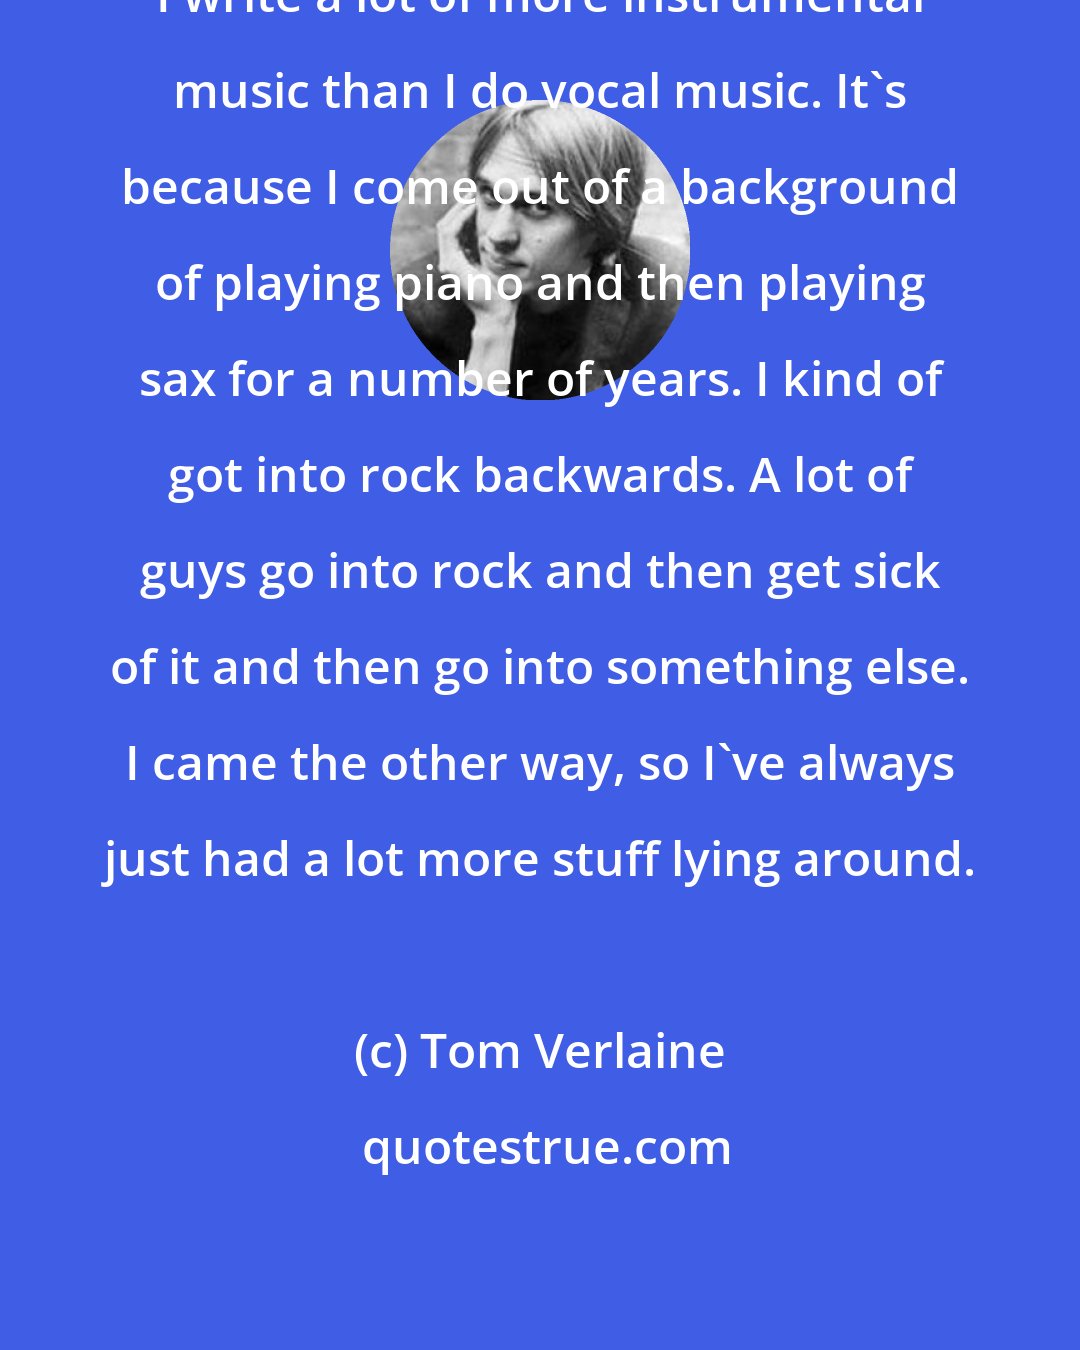 Tom Verlaine: I write a lot of more instrumental music than I do vocal music. It's because I come out of a background of playing piano and then playing sax for a number of years. I kind of got into rock backwards. A lot of guys go into rock and then get sick of it and then go into something else. I came the other way, so I've always just had a lot more stuff lying around.